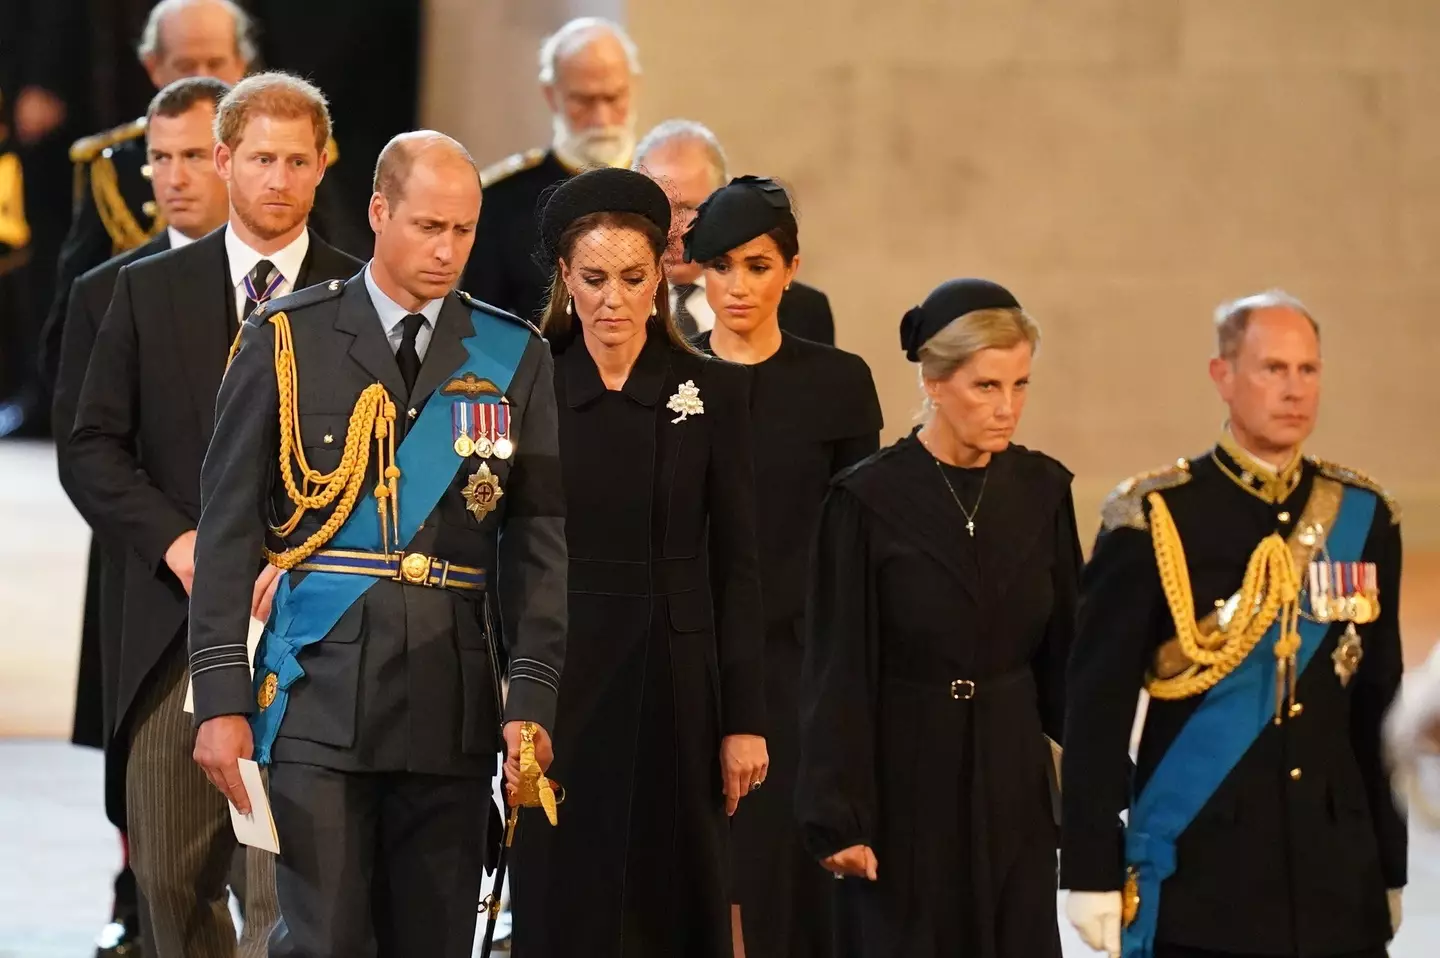 The Royal Family has gathered for the Queen's funeral tomorrow.